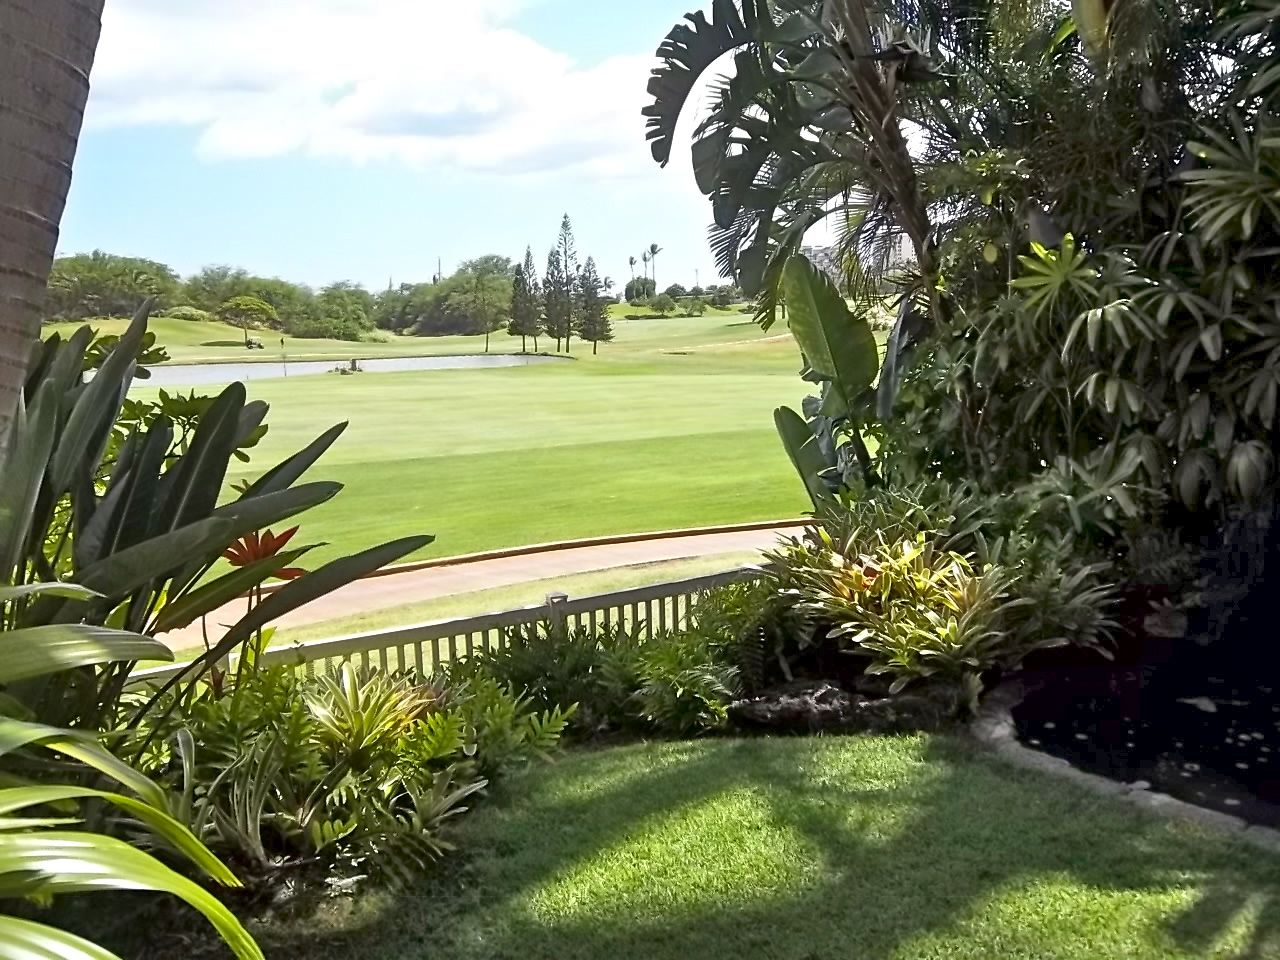 Kapolei Vacation Rentals, Fairways at Ko Olina 22H - Paradise for golfers, swimmers and photographers.